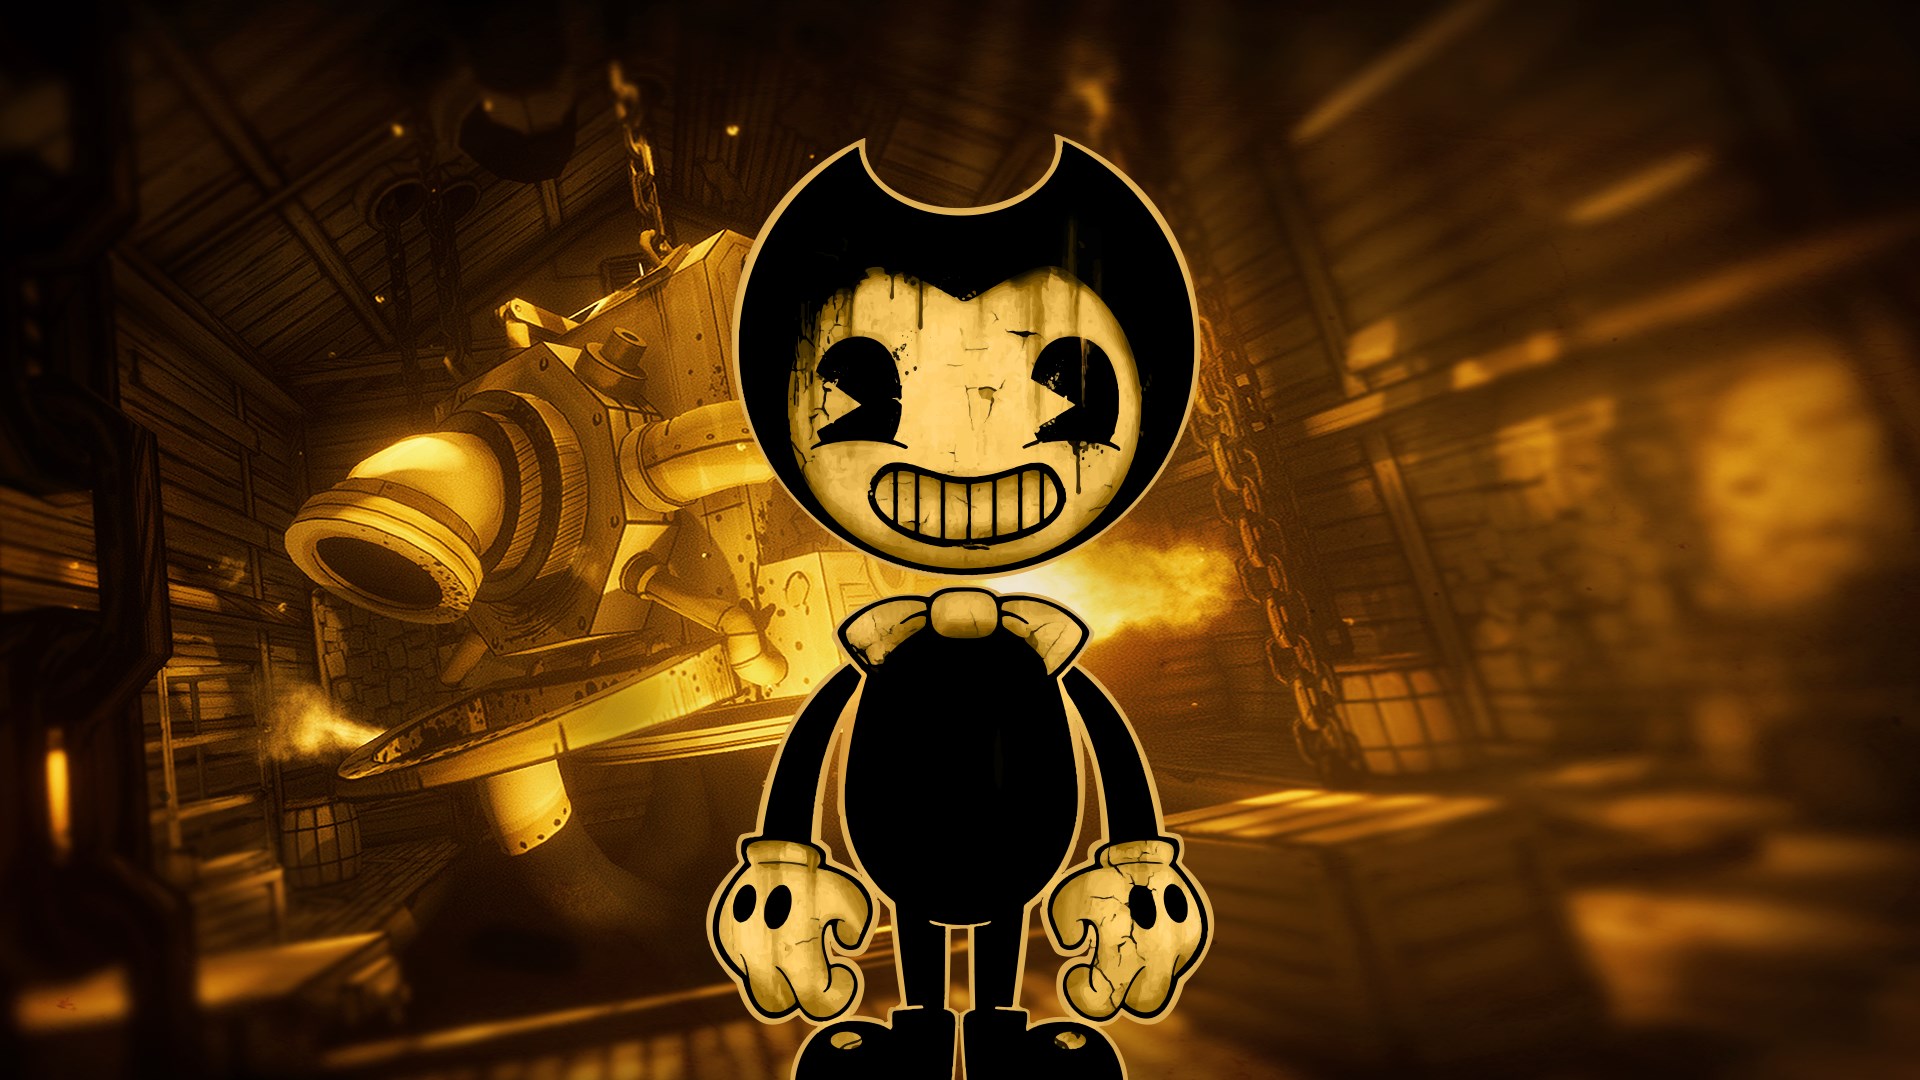 xbox bendy and the ink machine